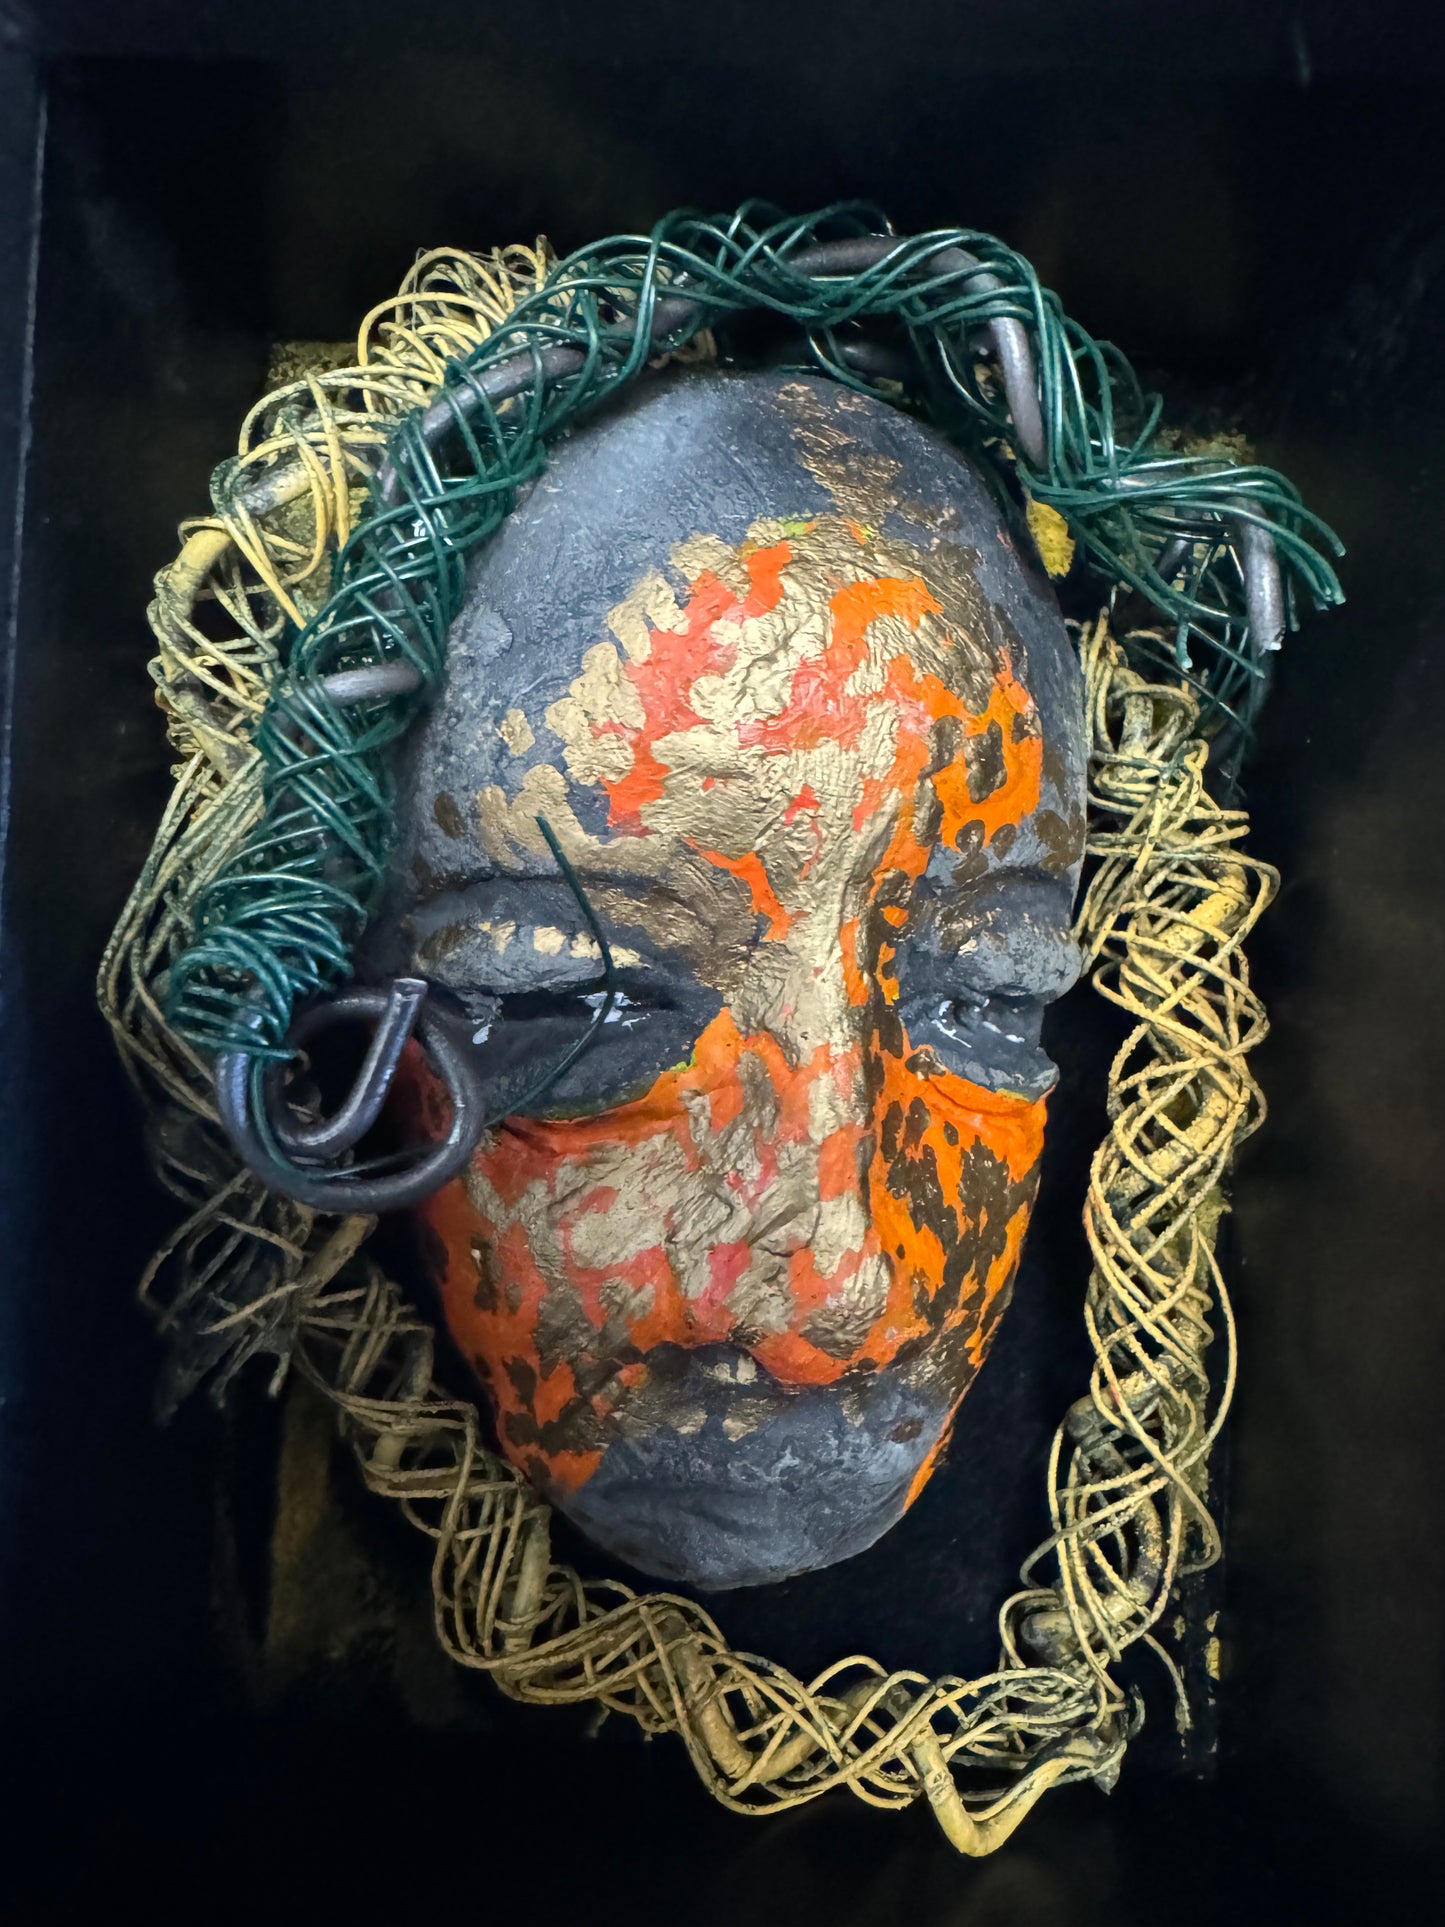 Jake is a mixed media mask that is raku fired and enclosed in a 4“ x 4“ black shadowbox. He has over 25 feet of 16 and 24 gauge wire as hair. 